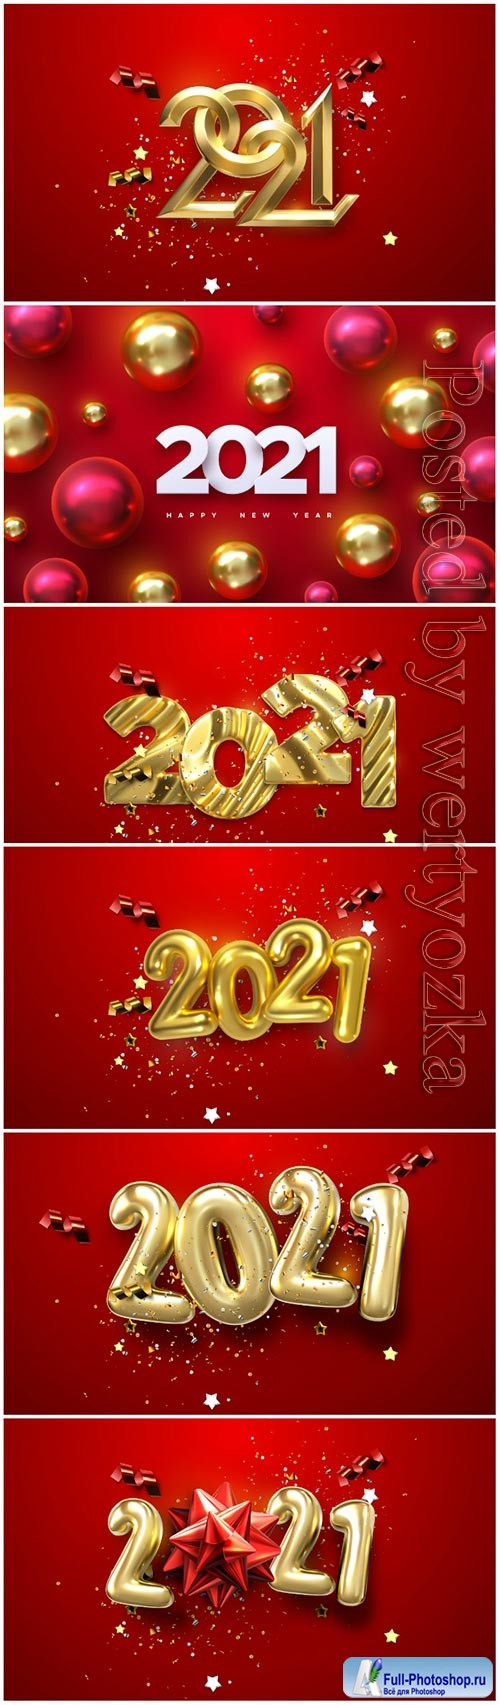 Vector numbers 2021 for new year illustration